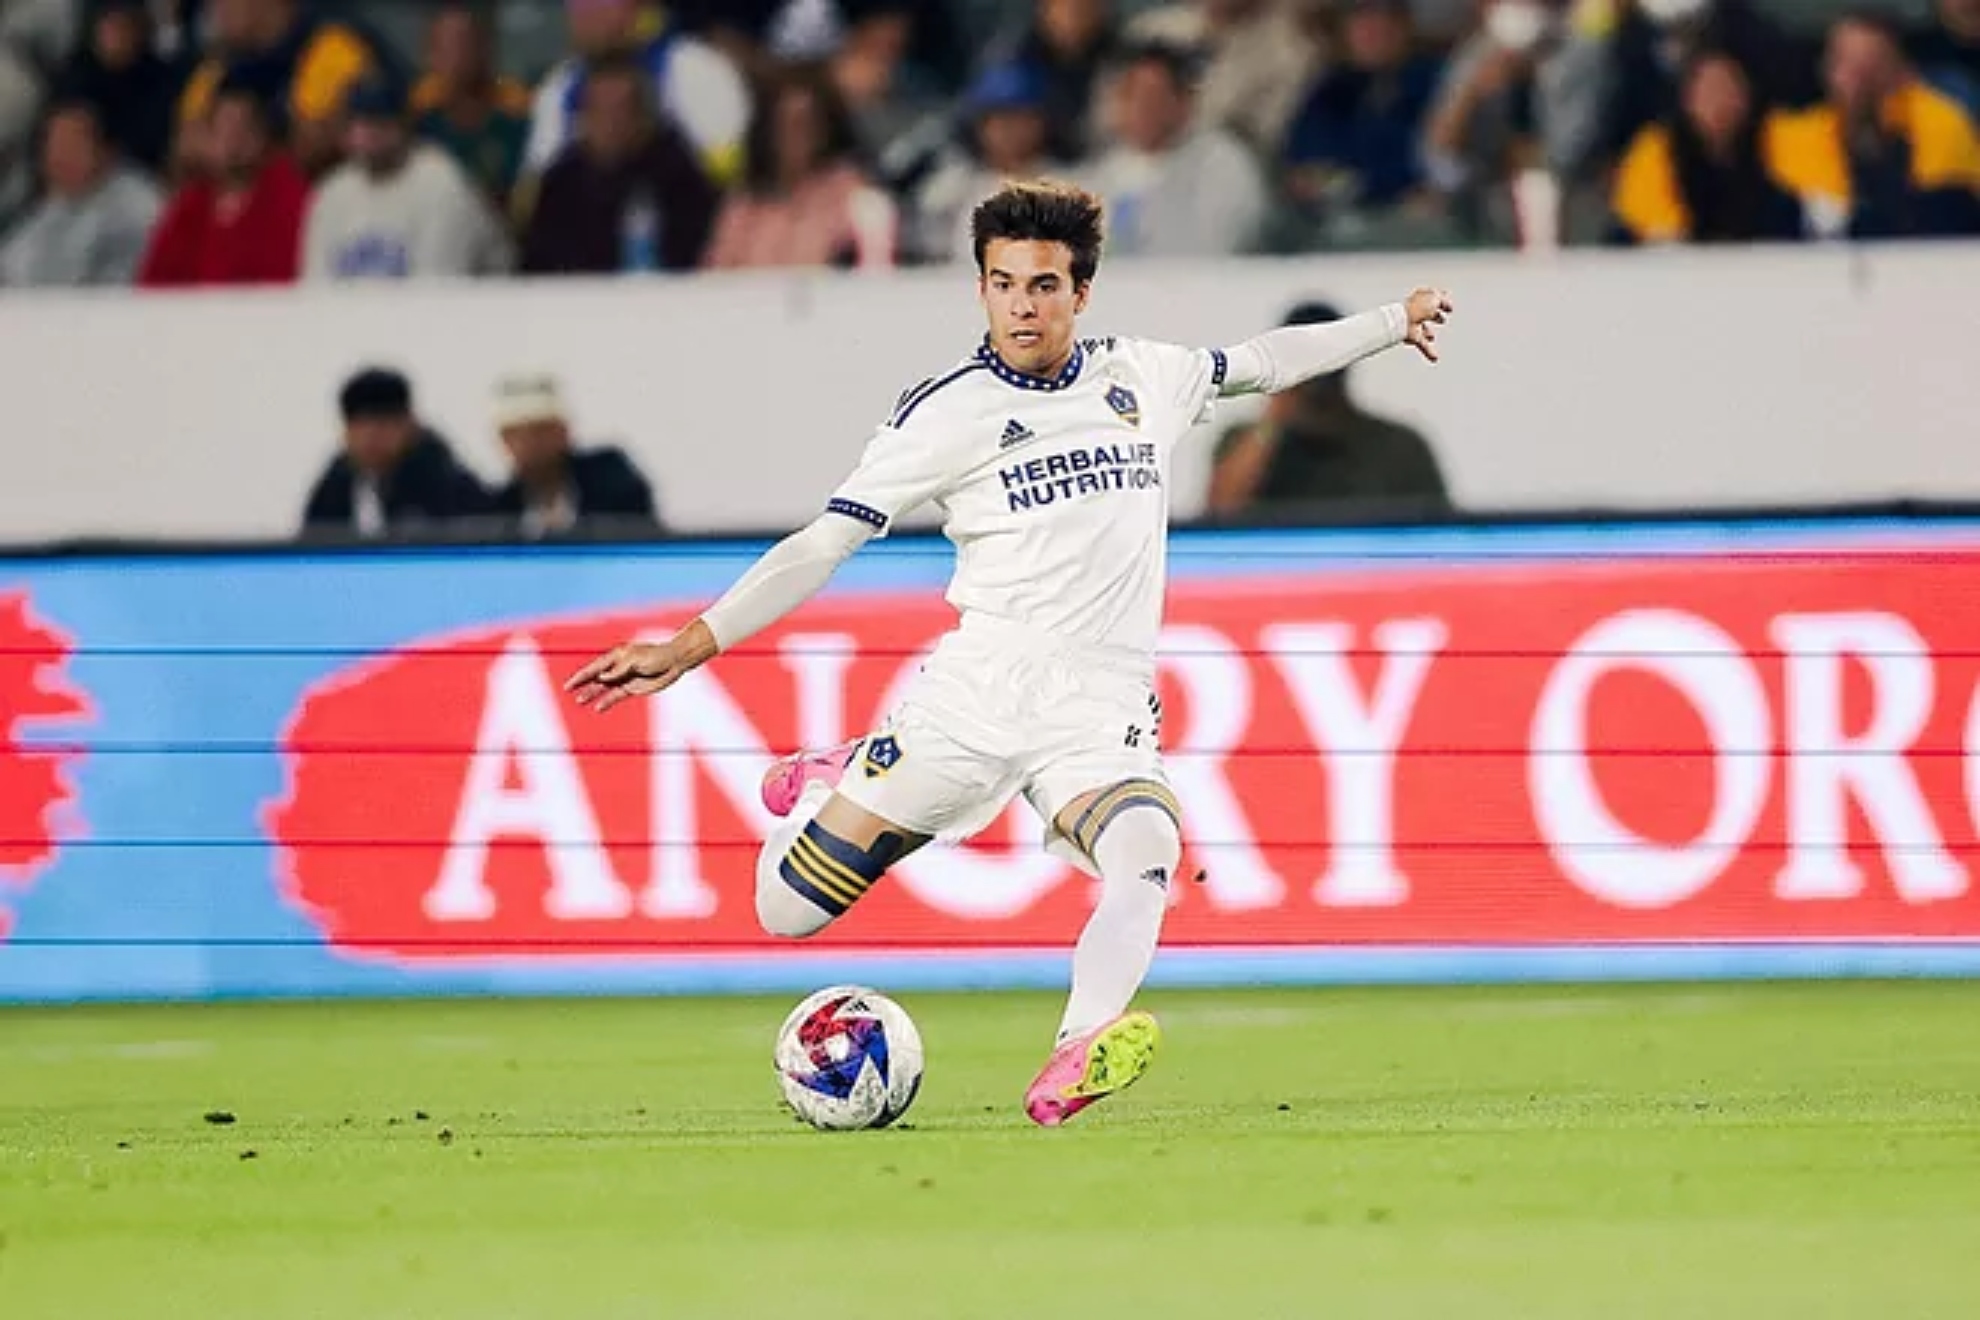 Riqui Puig brings LA Galaxy to victory with a beautiful goal vs Philadelphia Union on their first consecutive victory